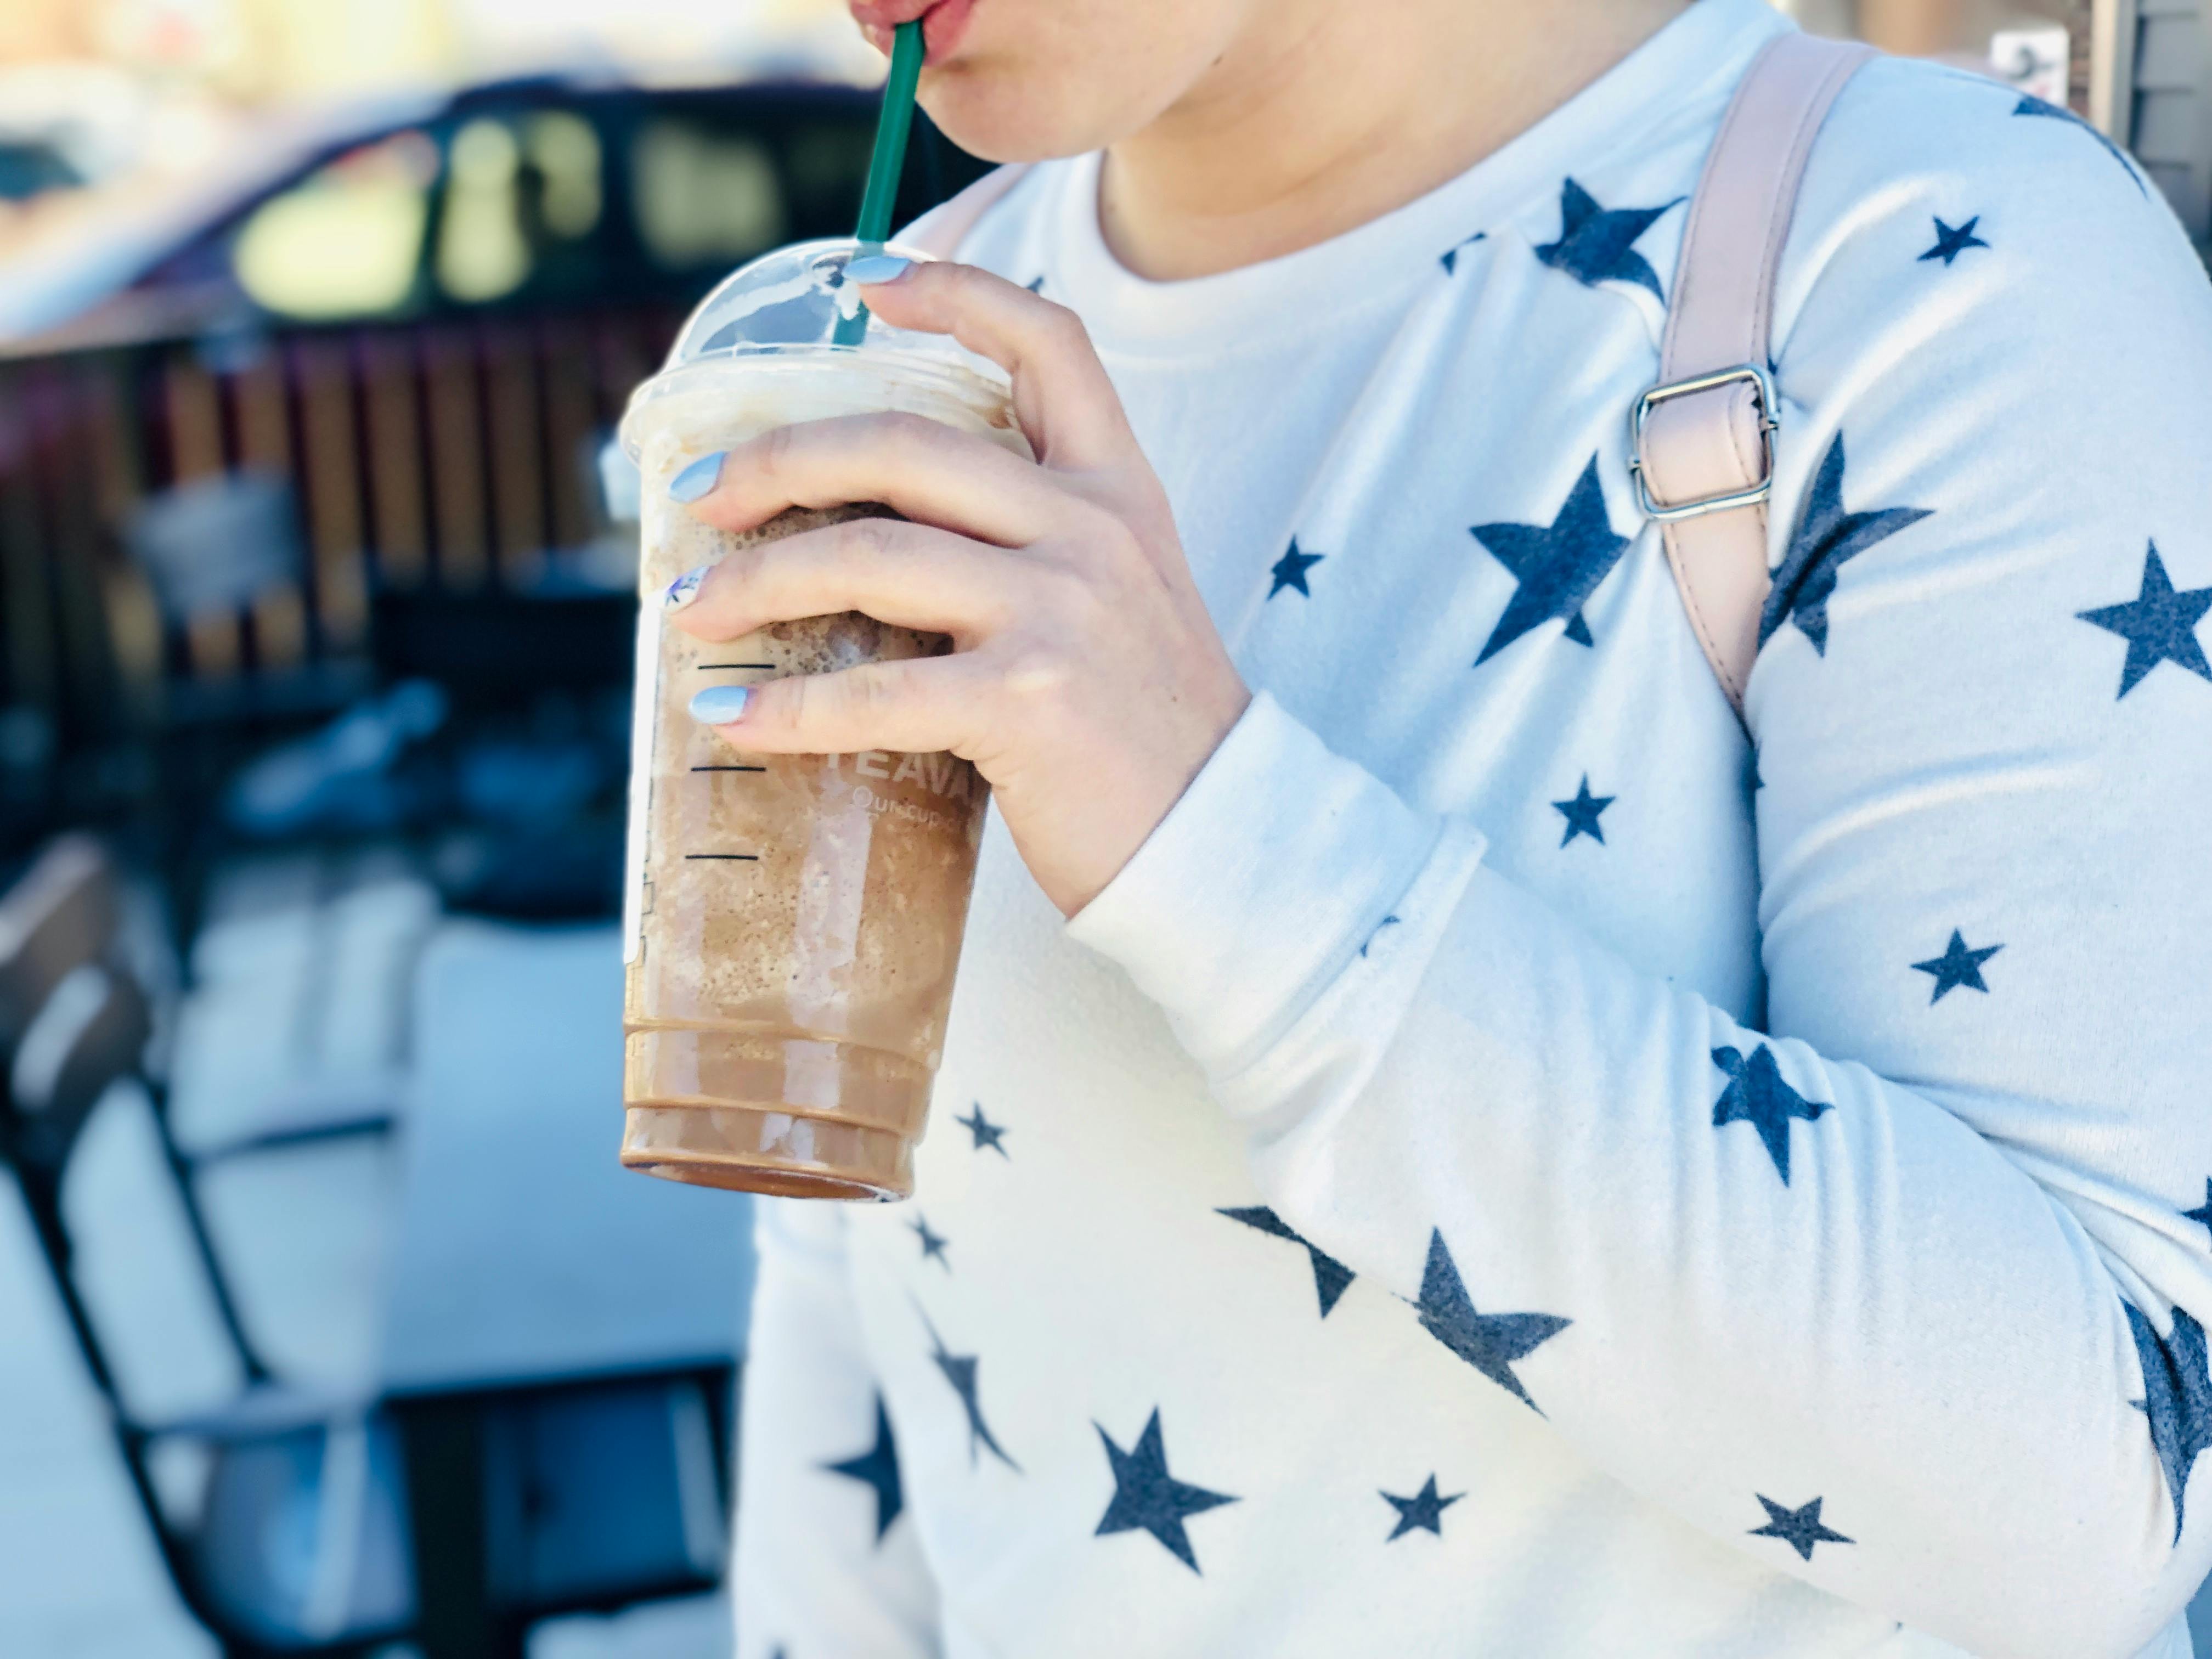 A woman holding a frozen blended Starbucks drink, drinking from the straw.